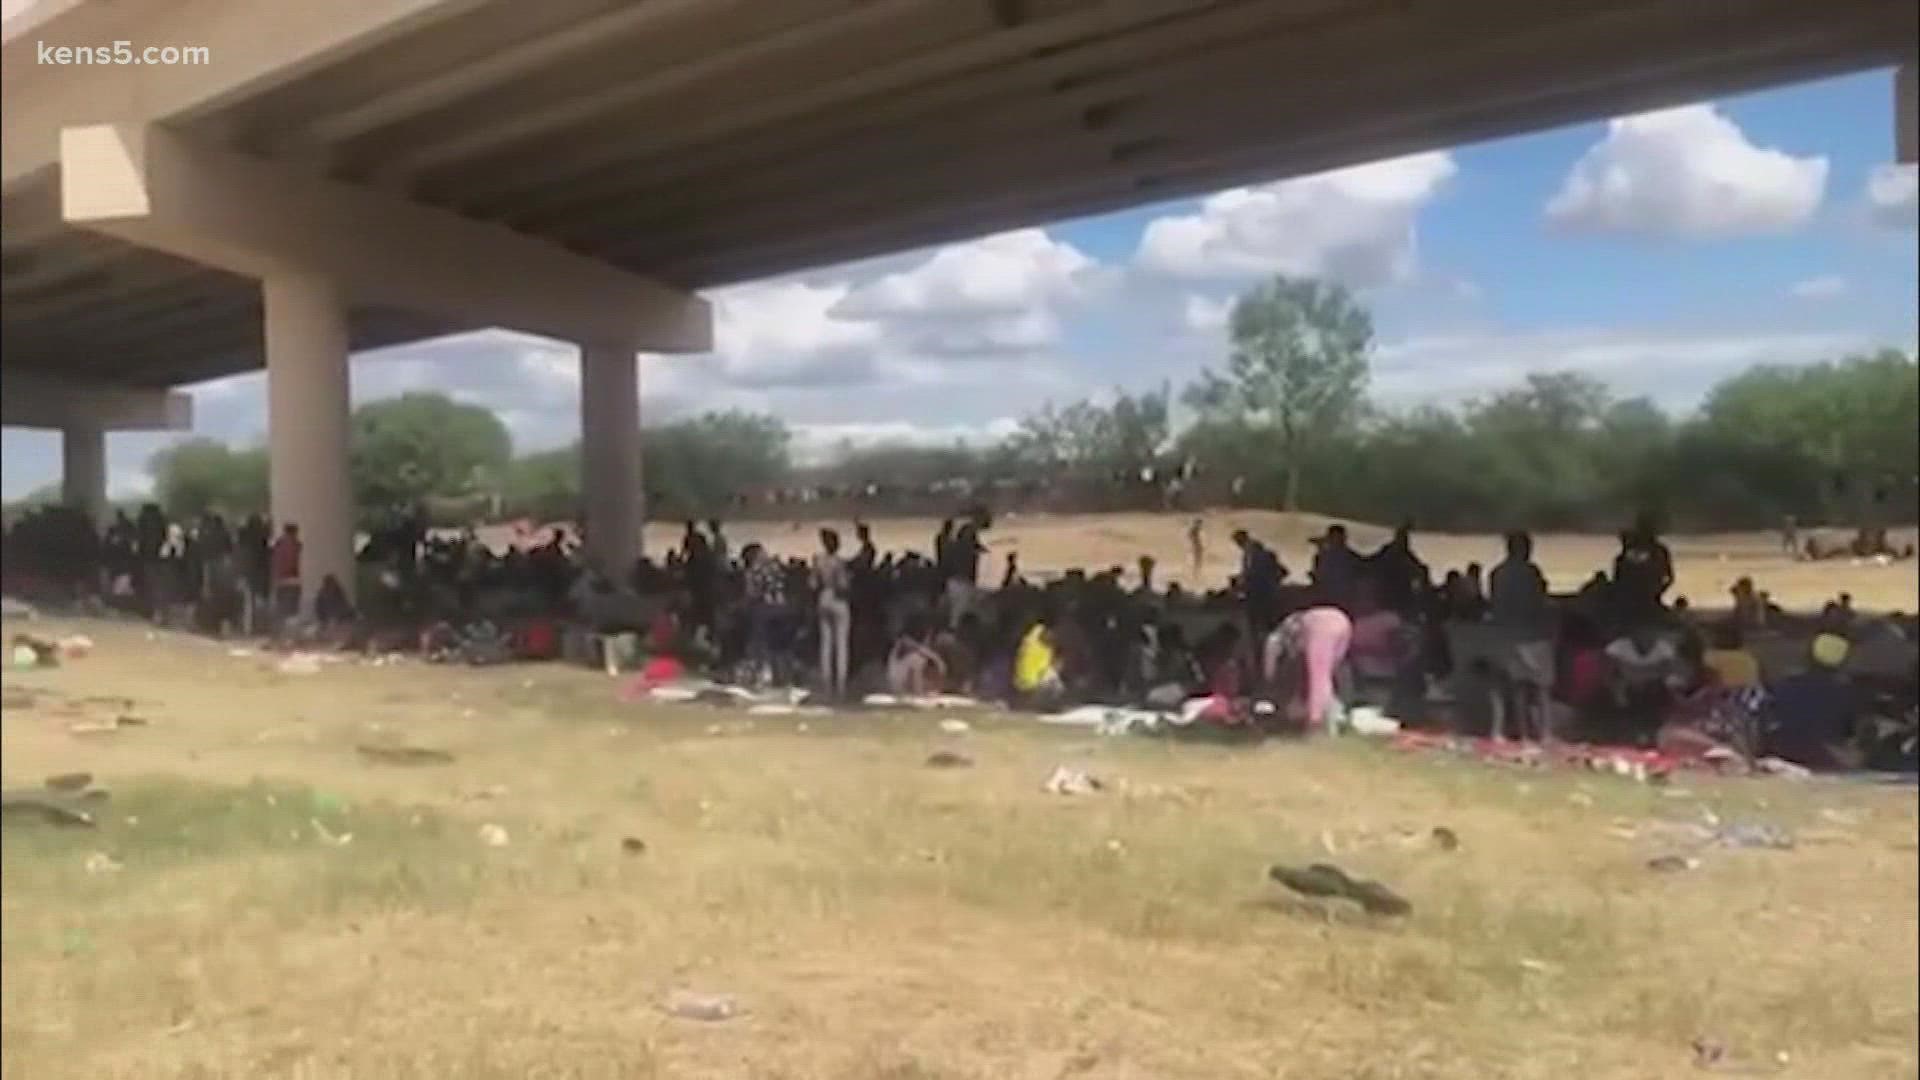 Our KENS 5 Border Team obtained this video of people under the International Bridge.